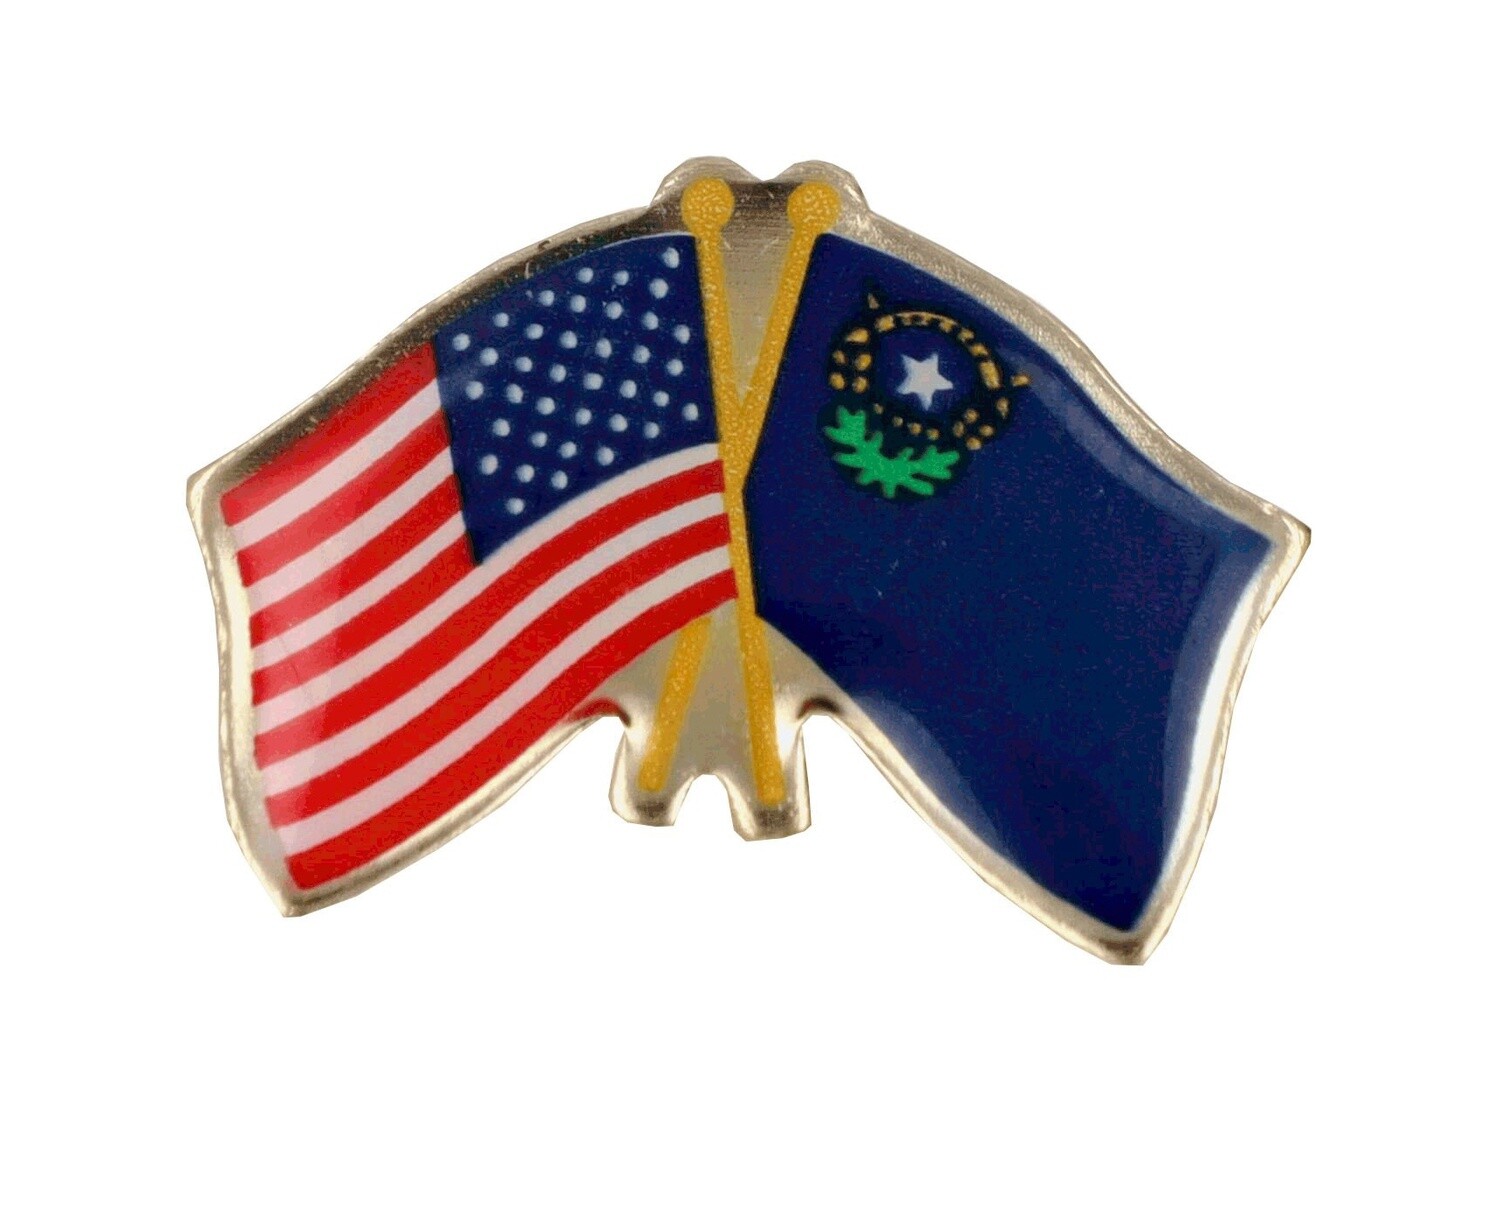 US and NV Crossed Flags Lapel Pin